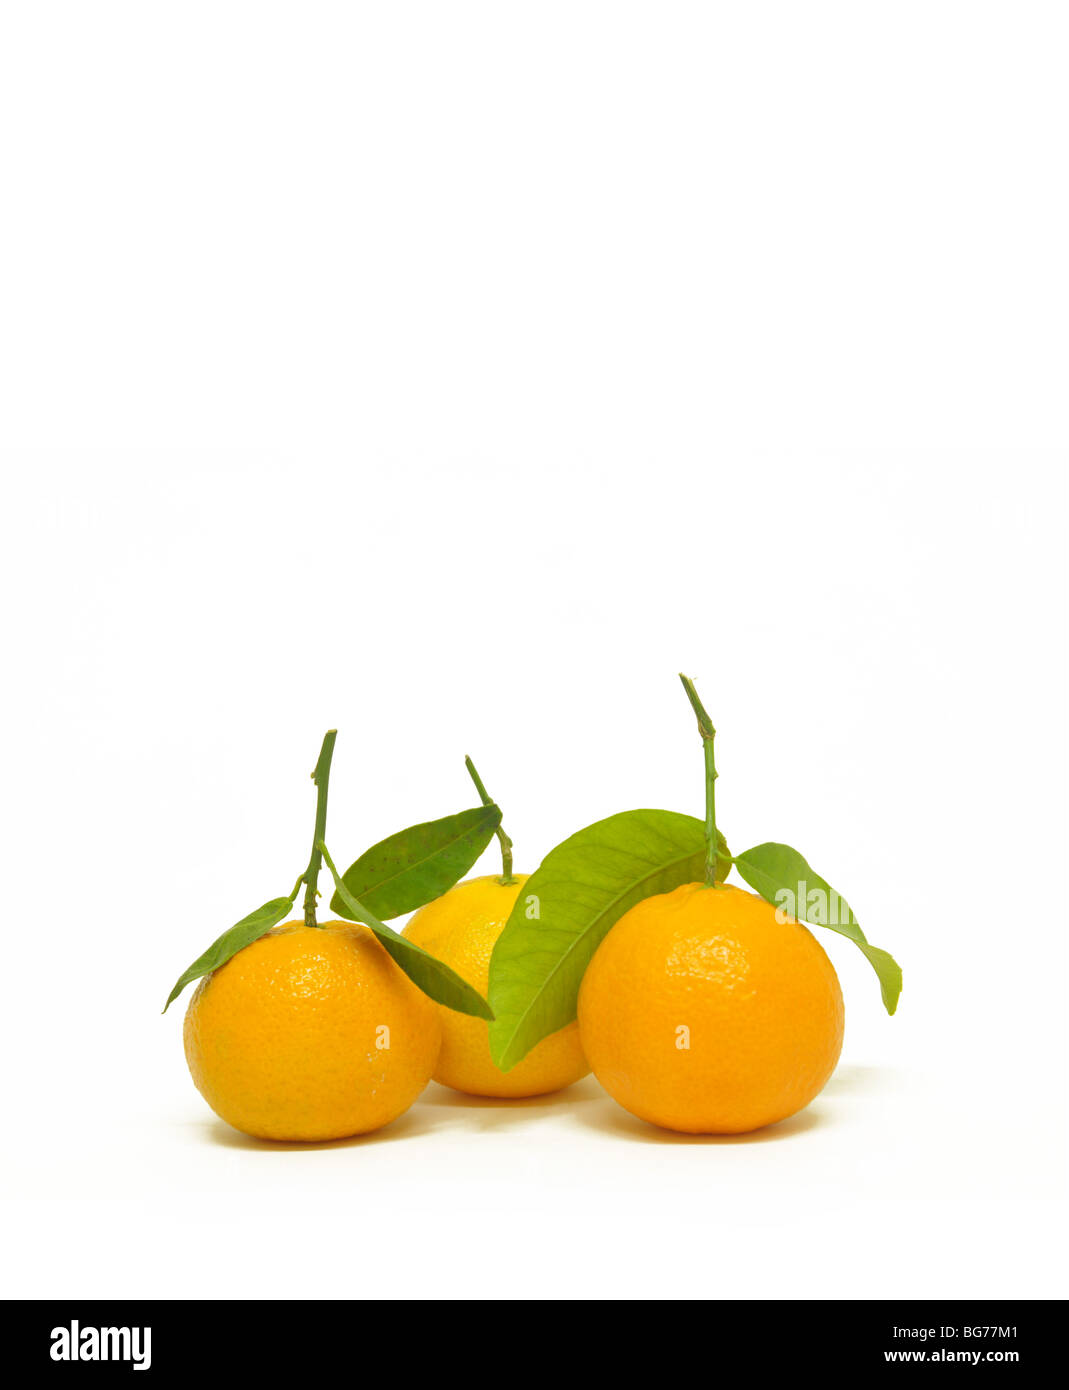 Cutout of three oranges with their stalks and leaves. Stock Photo